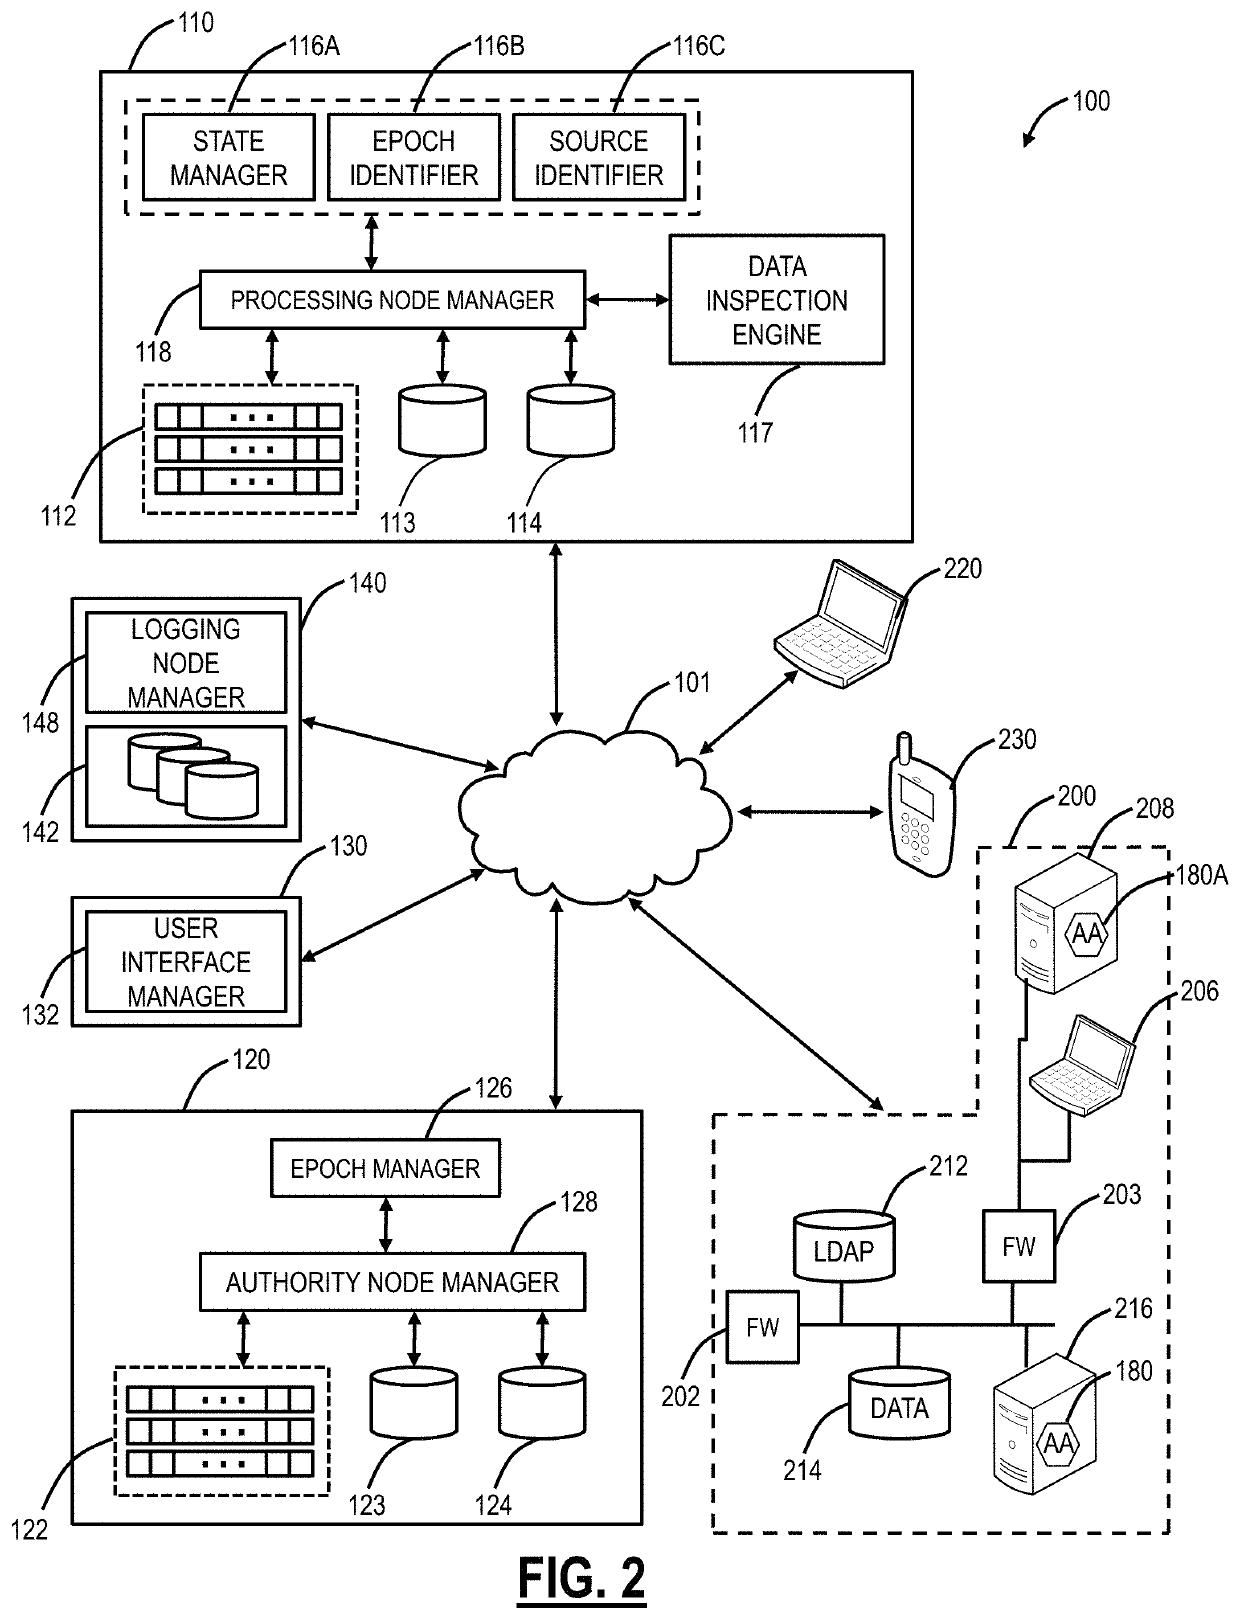 Systems and methods for troubleshooting and performance analysis of cloud based services